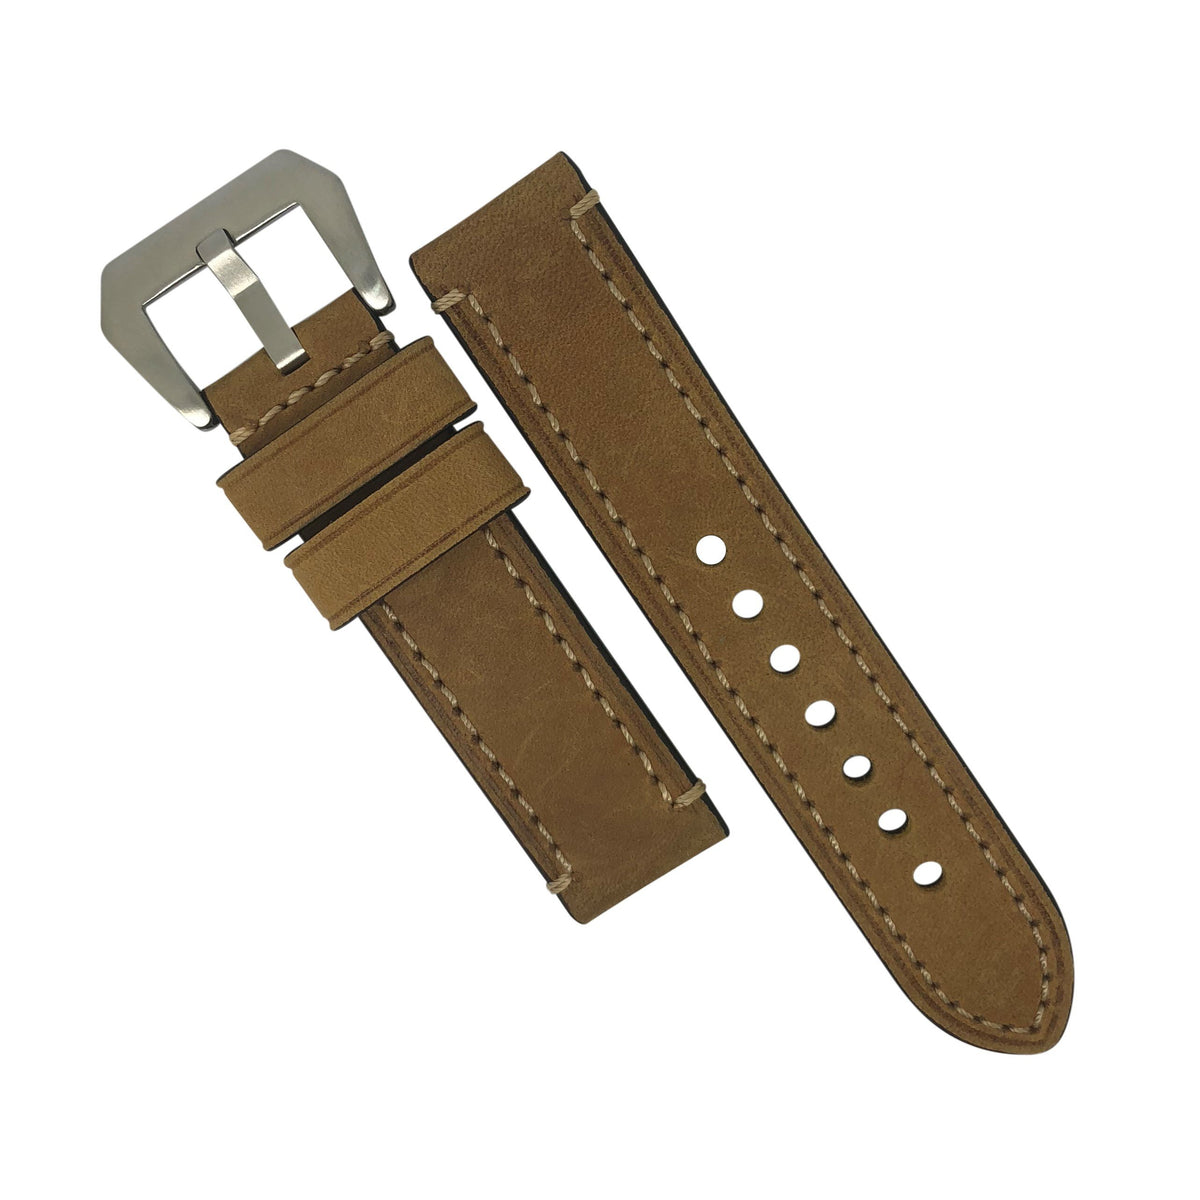 M1 Vintage Leather Watch Strap in Tan (20mm) - Nomad Watch Works Malaysia